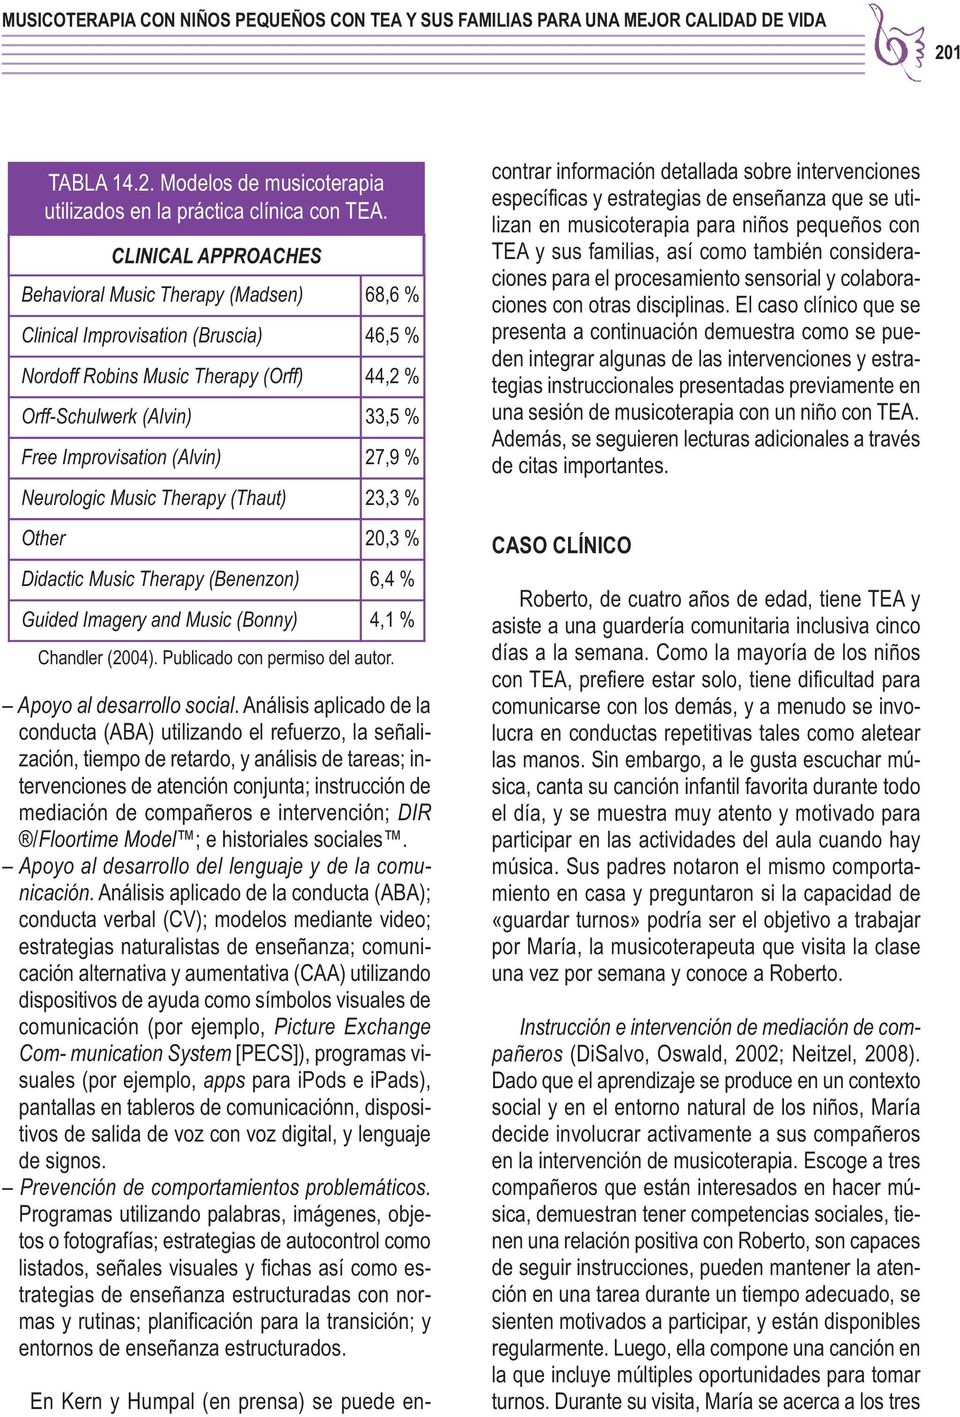 (Alvin) 27,9 % Neurologic Music Therapy (Thaut) 23,3 % Other 20,3 % Didactic Music Therapy (Benenzon) 6,4 % Guided Imagery and Music (Bonny) 4,1 % Chandler (2004). Publicado con permiso del autor.